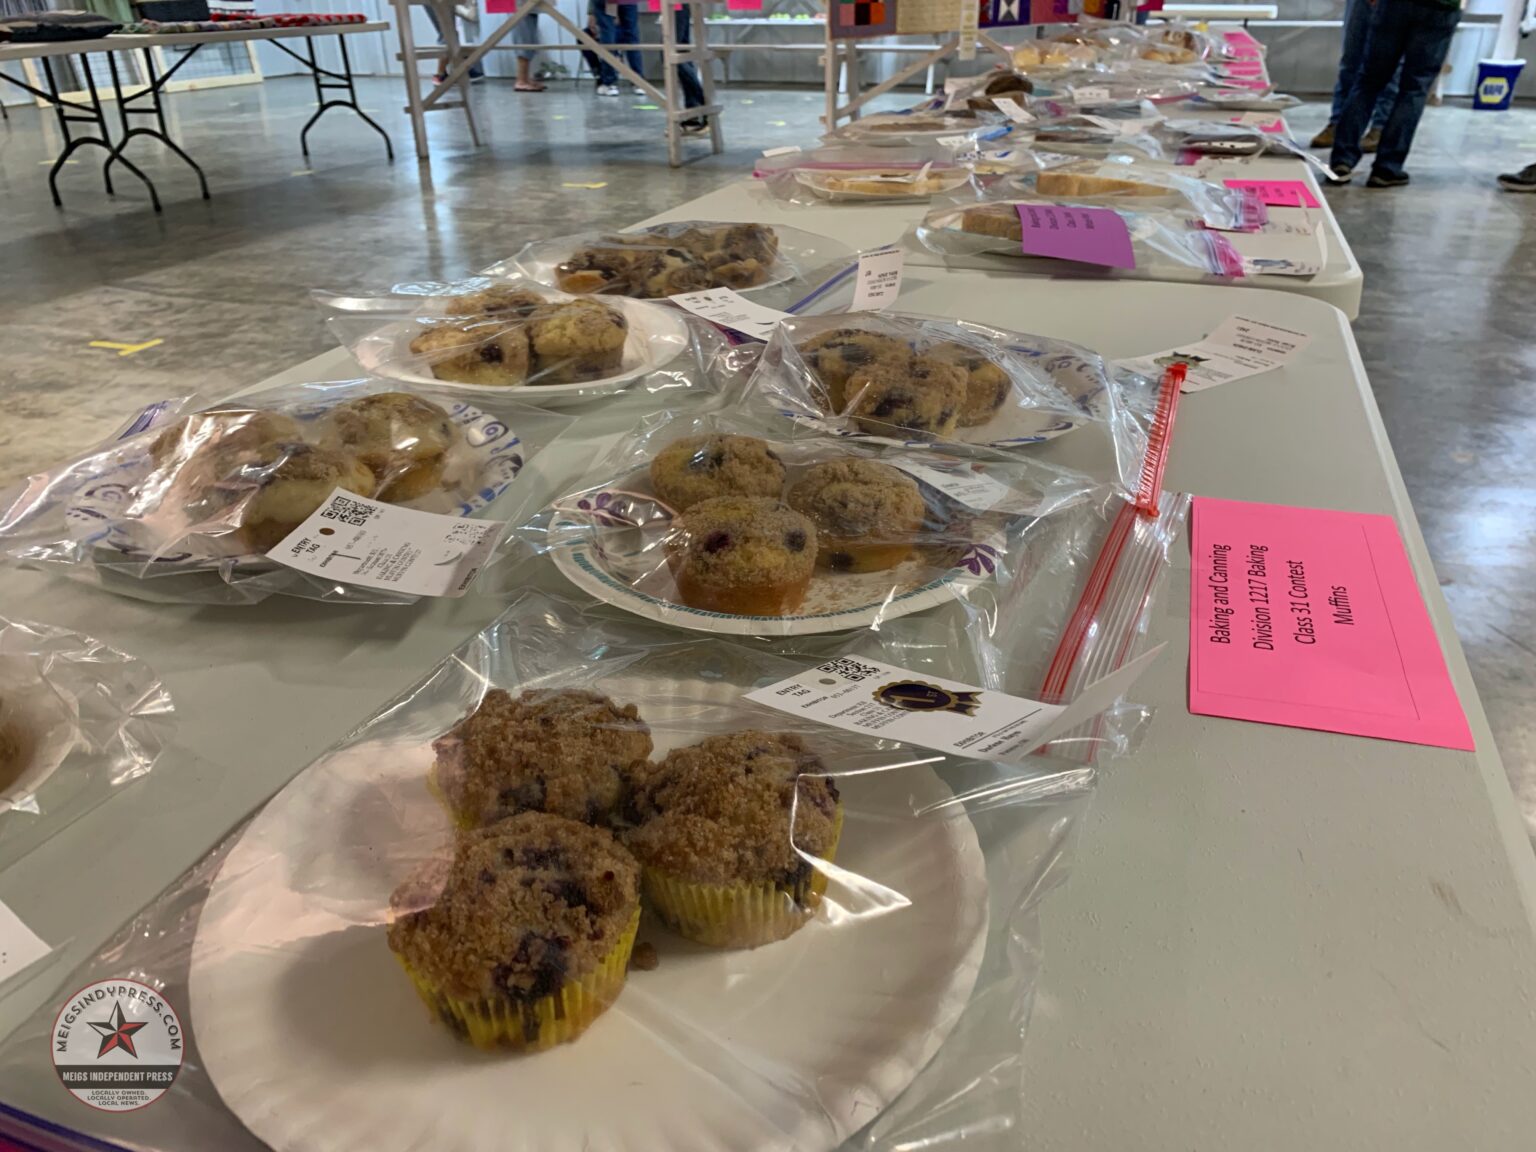 Baking and Canning Judging Results from the 2021 Meigs County Fair